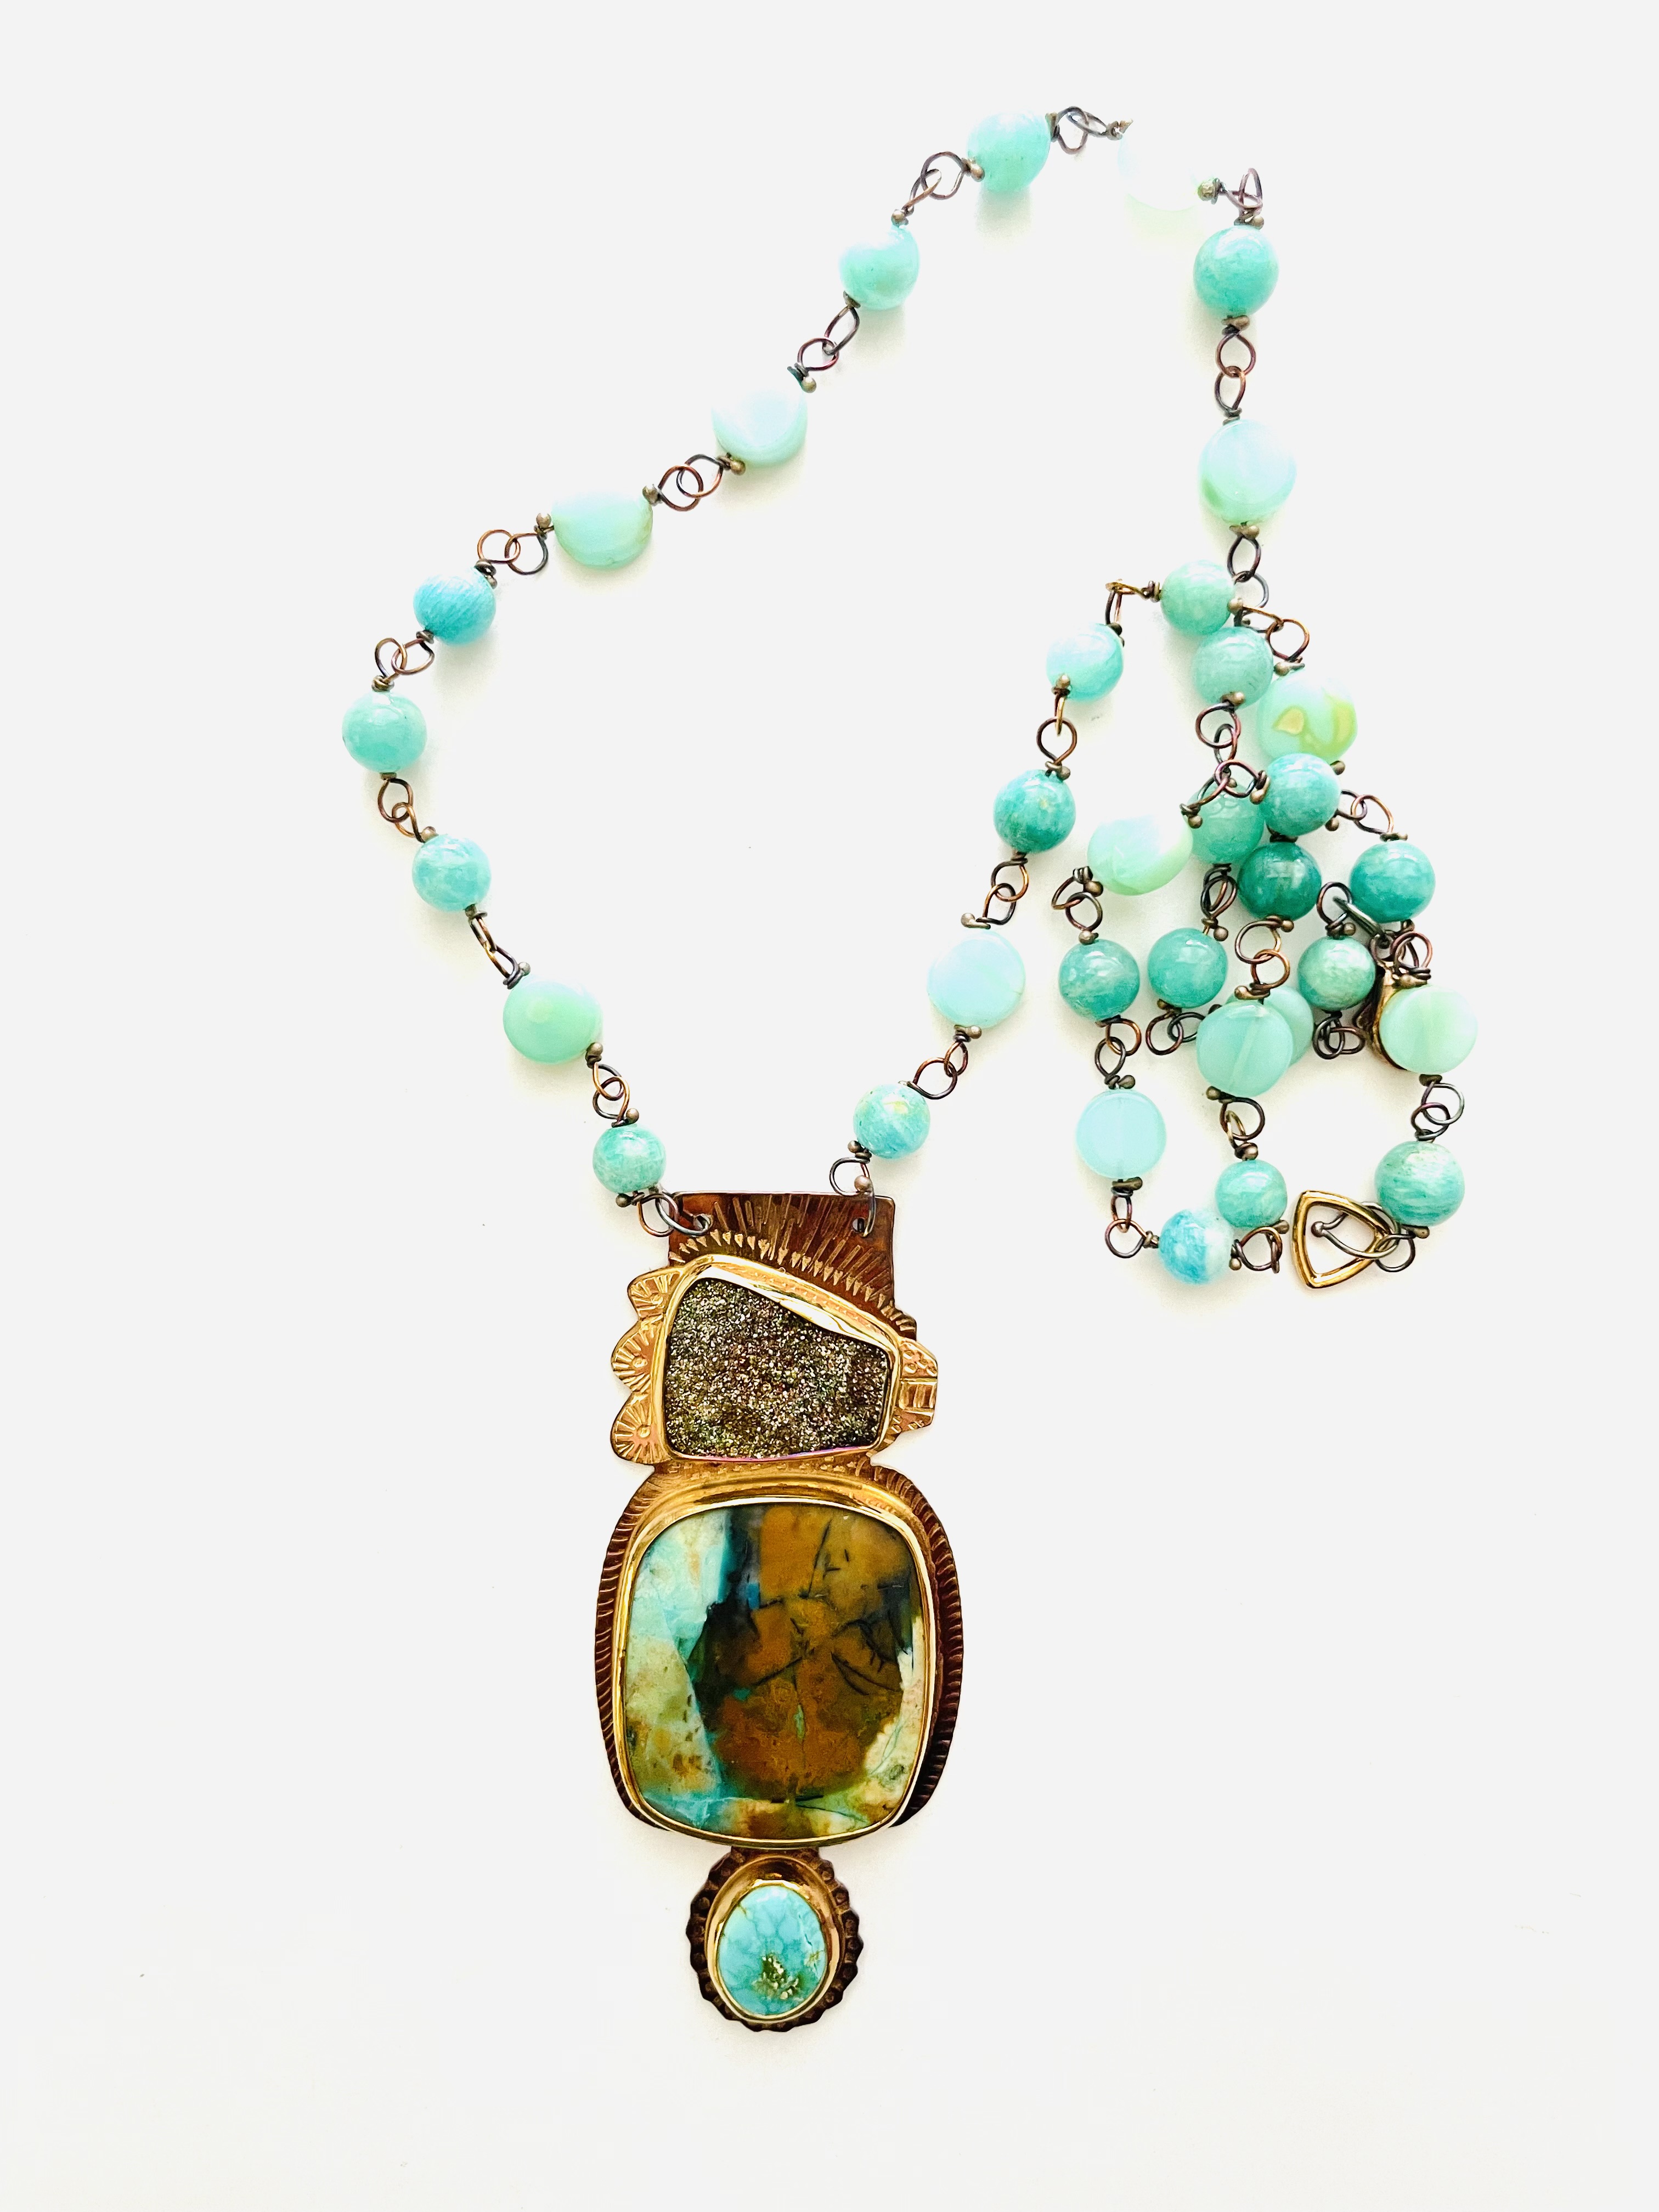 Sterling Silver, 18k Gold, Pyrite Druzy, Sleeping Beauty Turquoise, and Blue Opal Petrified Wood Necklace with Amazonite and Peruvian Opal Beads.